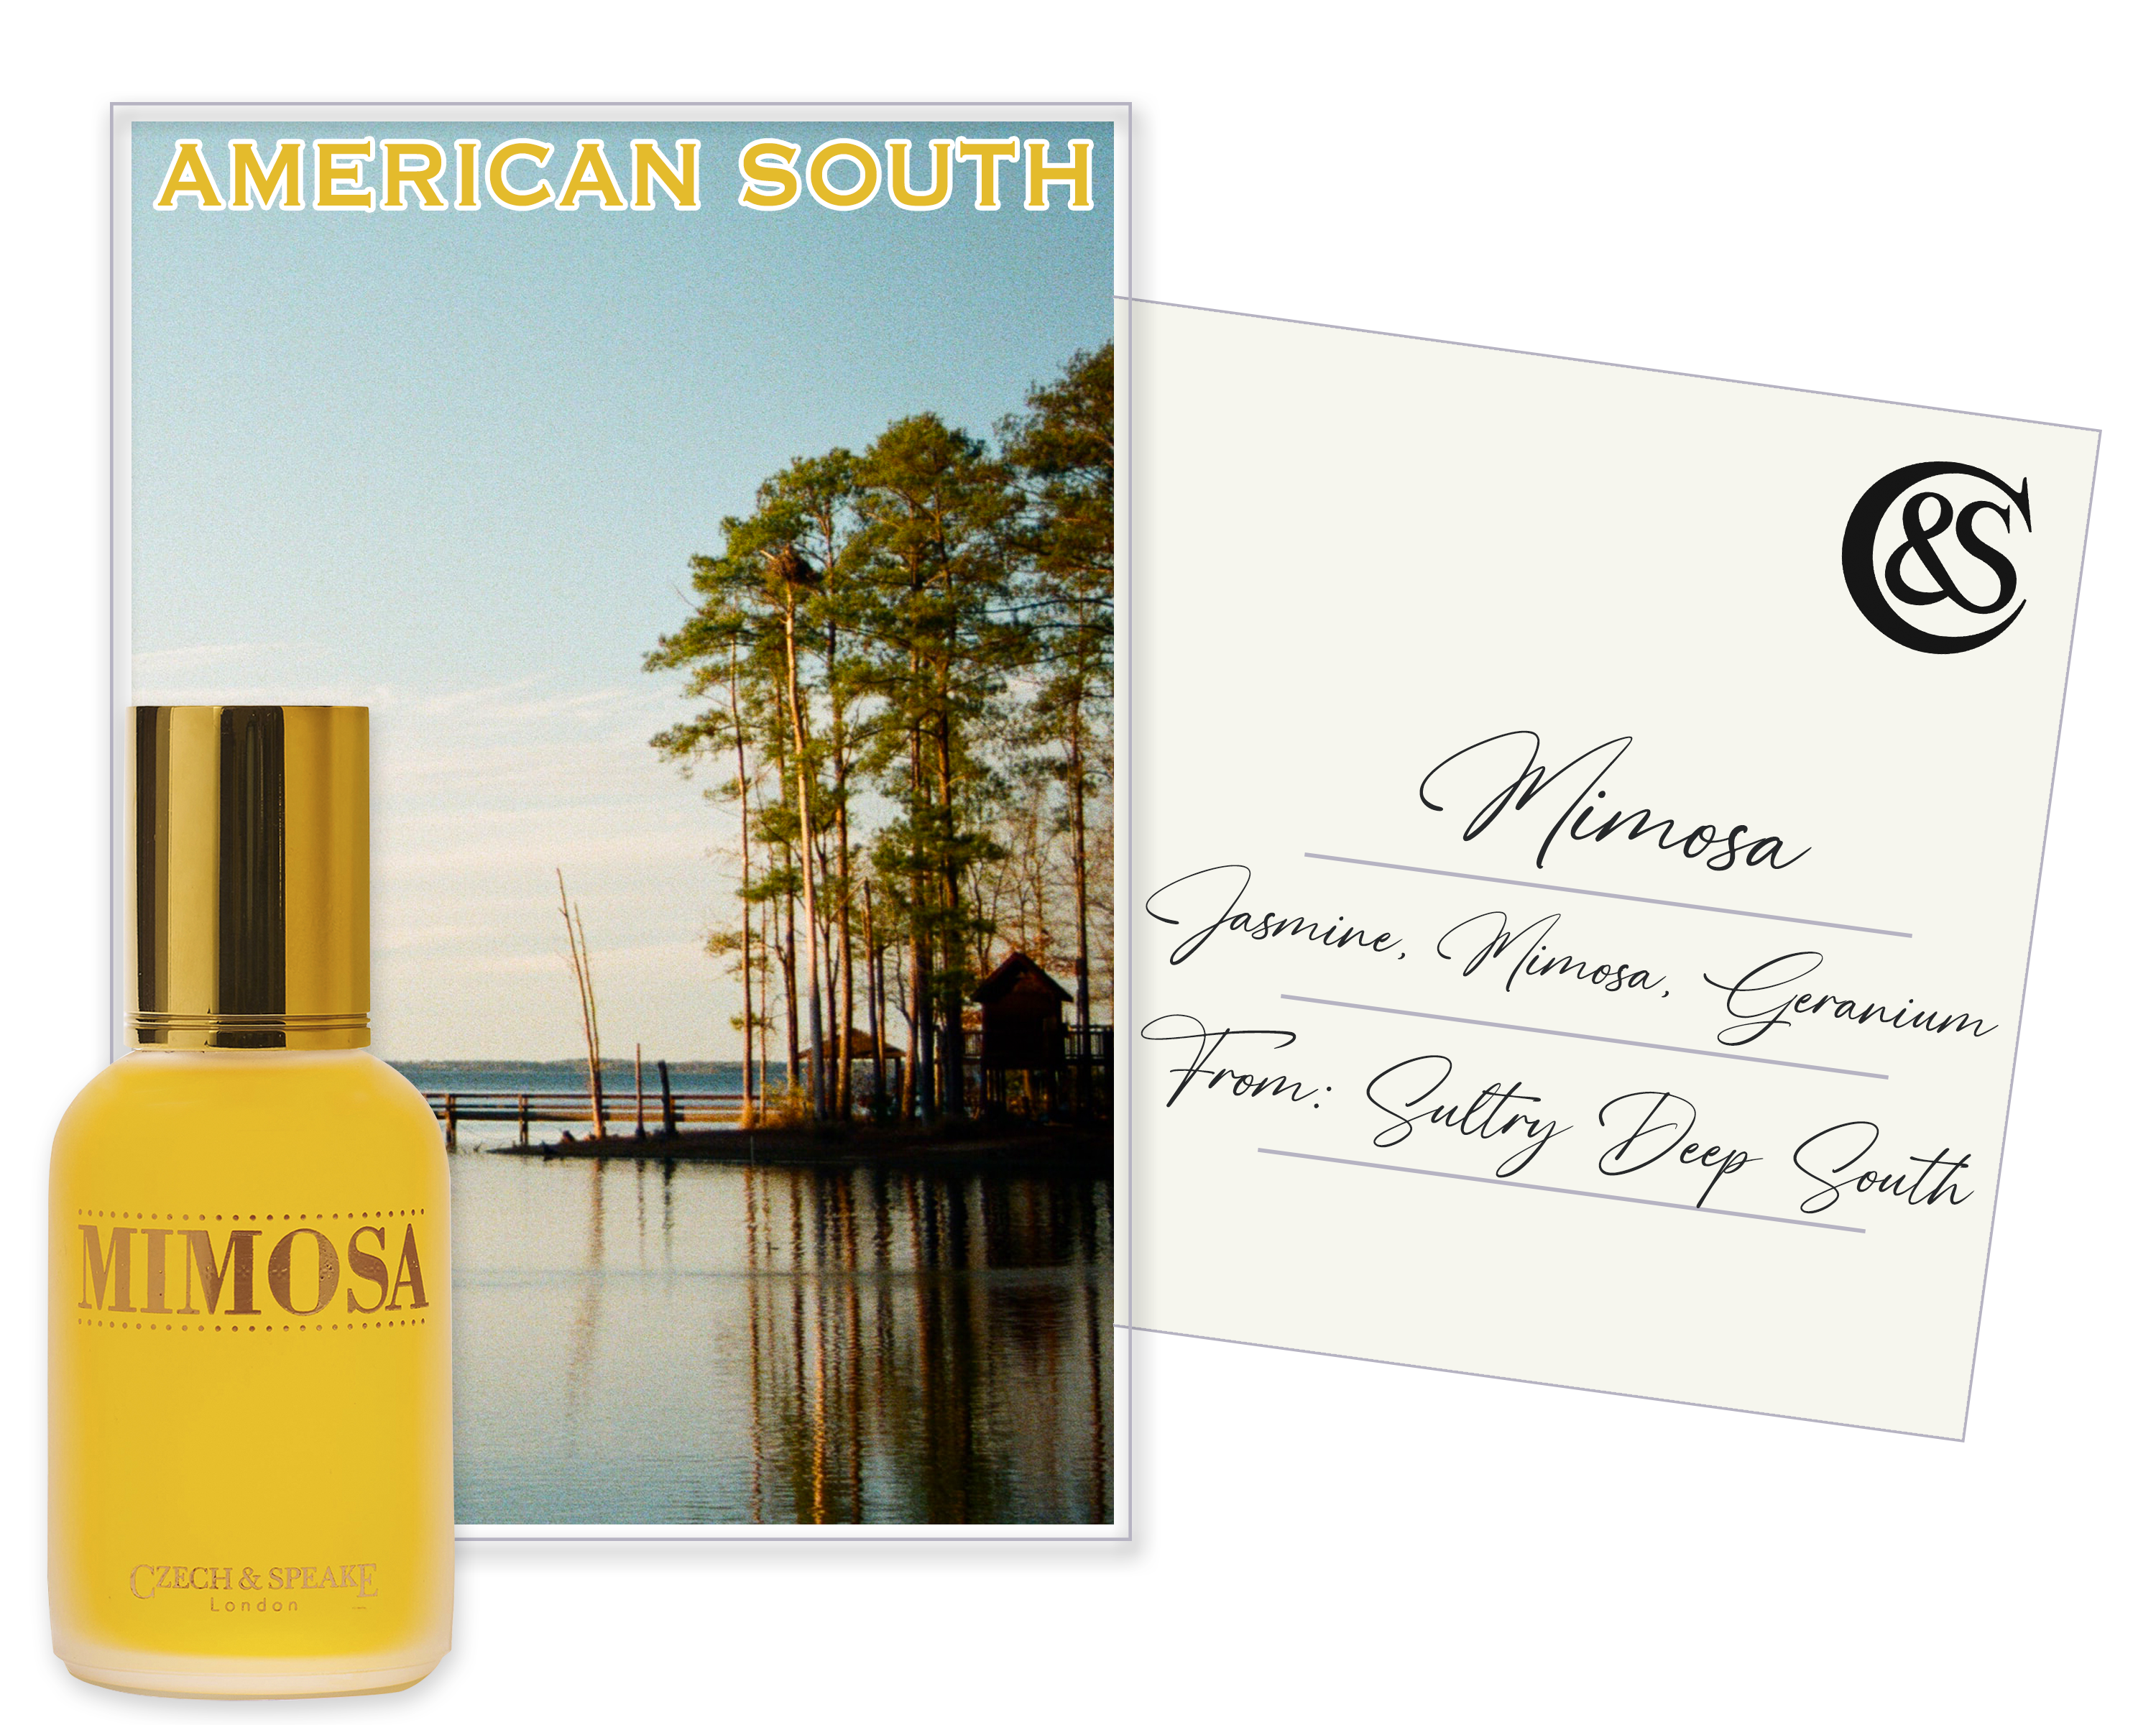 Mimosa 50ml bottle overlaid on a art deco style postcard showing a lake in American Deep South with an orange title at top of image. Tucked to the right is the reverse of postcard showing C&S roundel as stamp, Mimosa, its fragrance notes and where postcard is from.